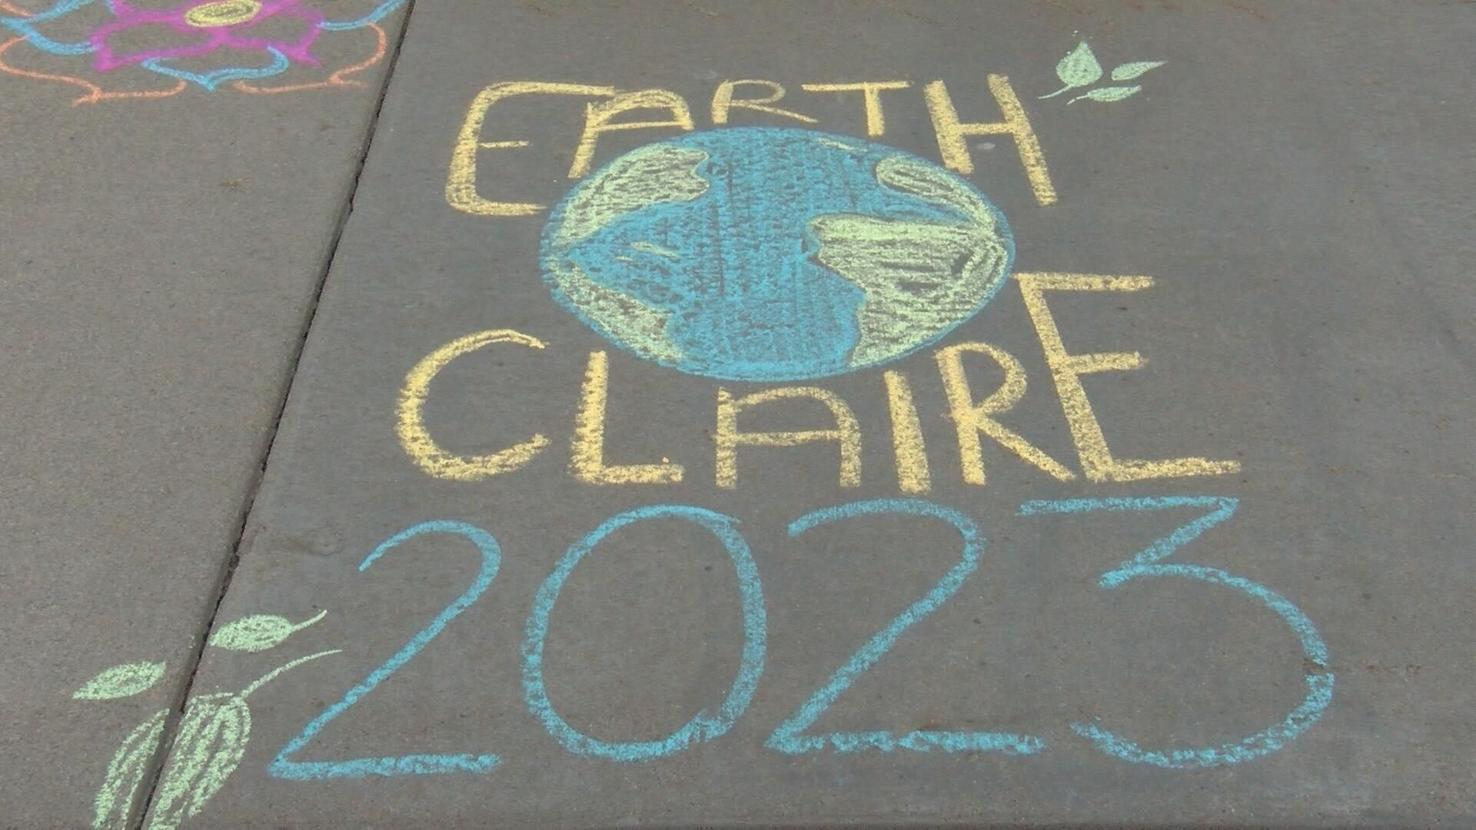 University holds 'Earth Claire' festival to promote sustainability